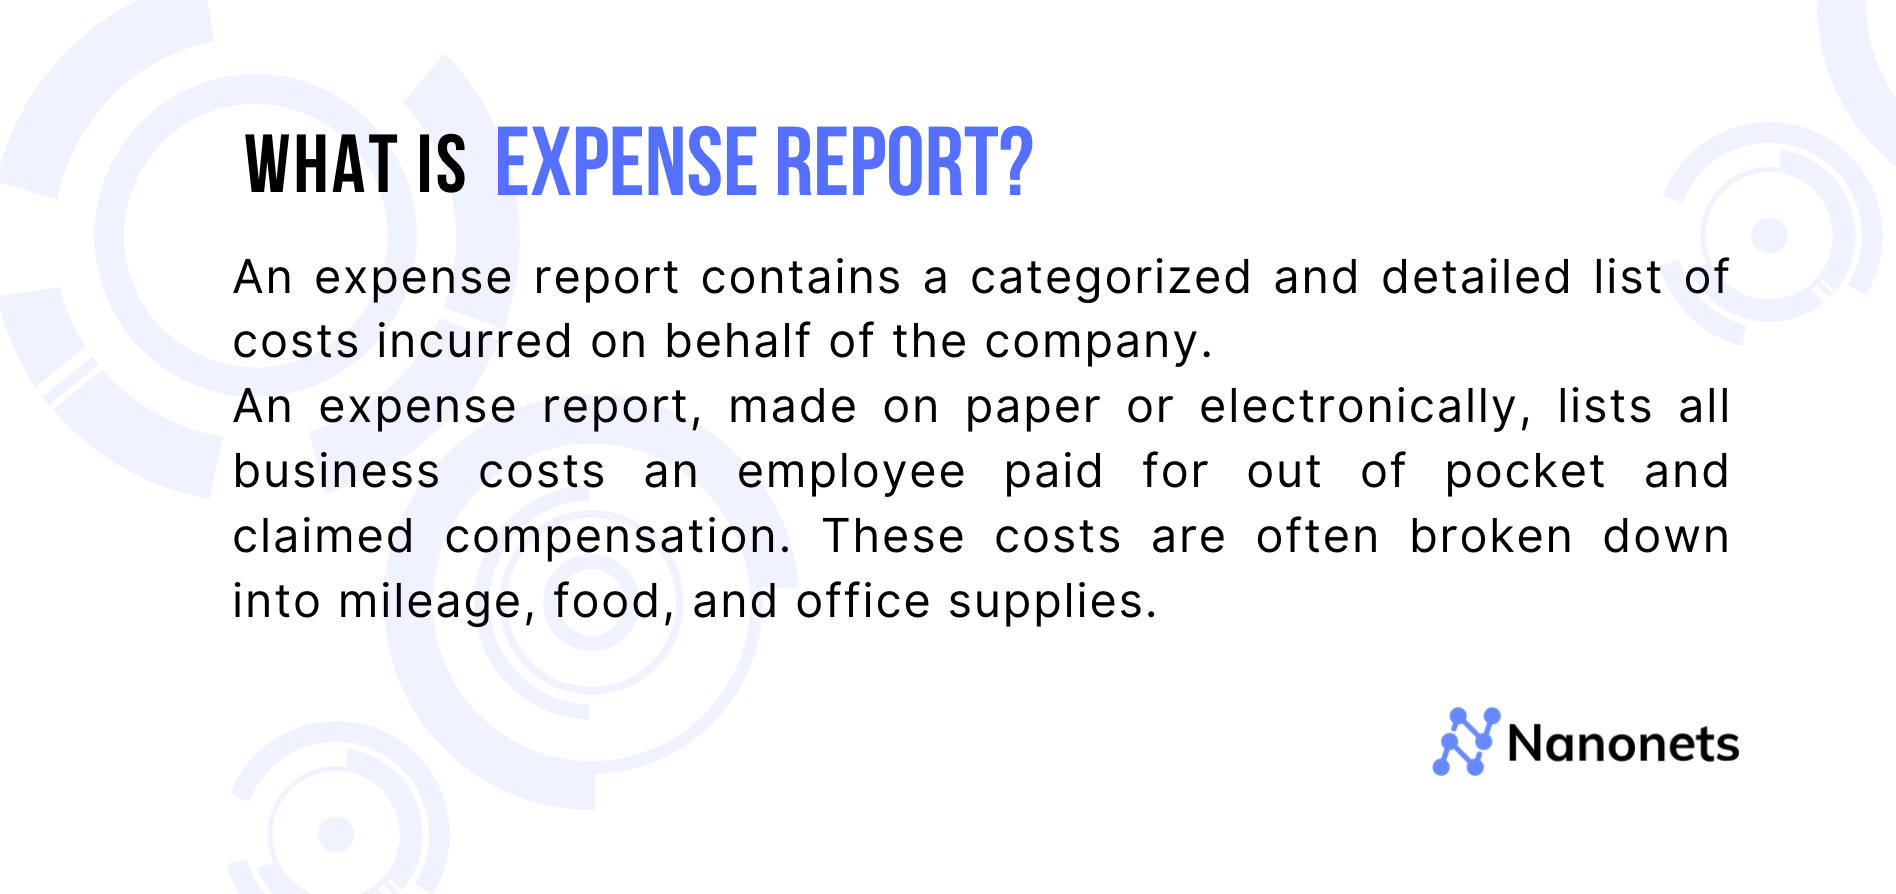 What is an expense report?